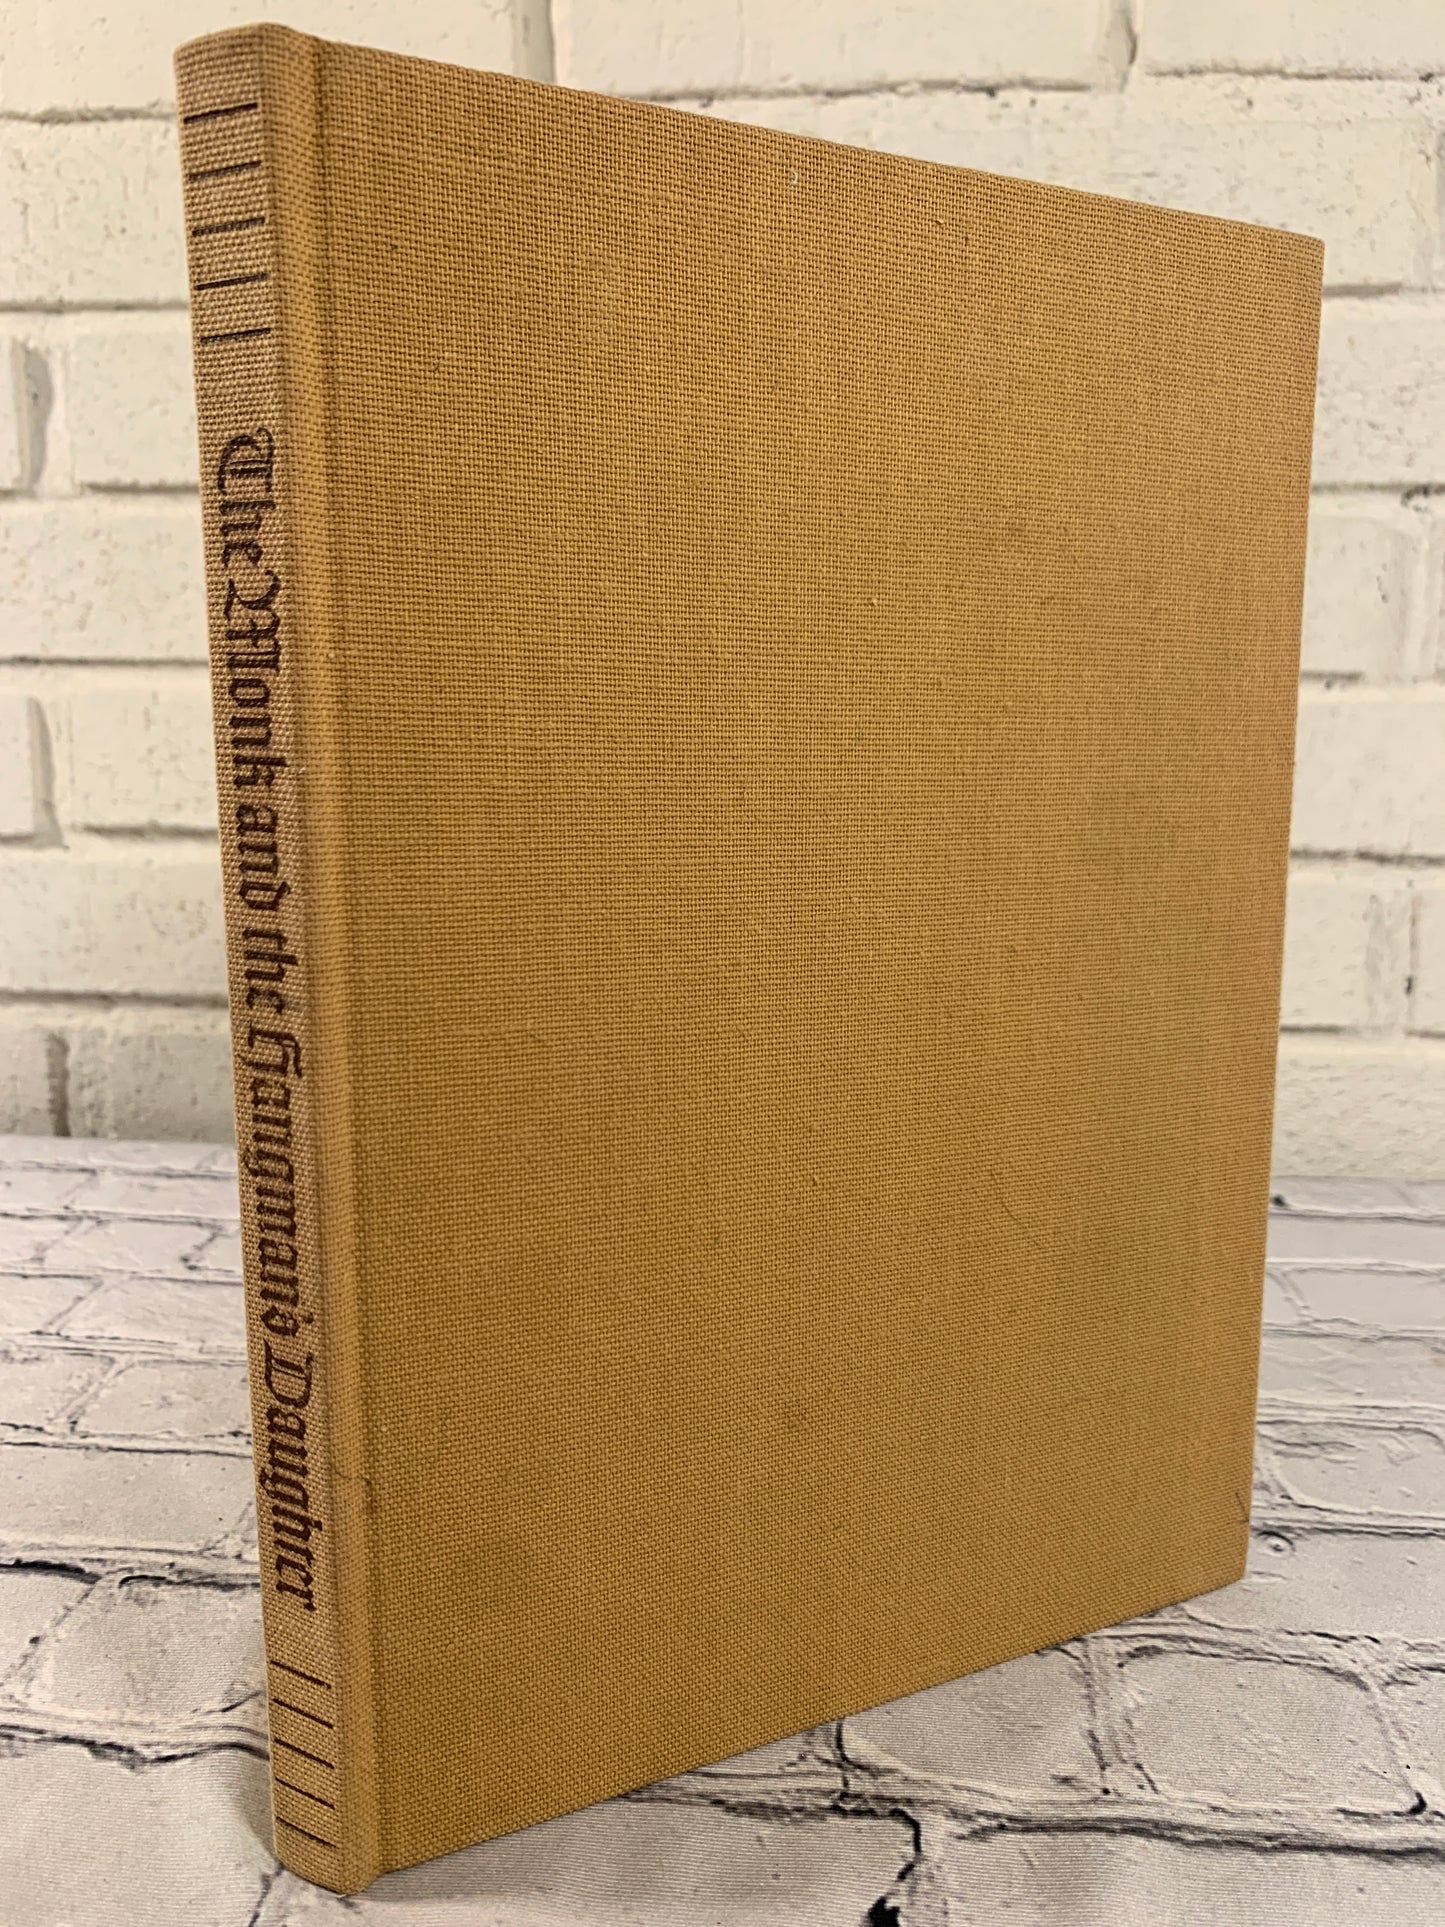 The Monk and the Hangman's Daughter by Ambrose Bierce [1967 · Heritage Press]